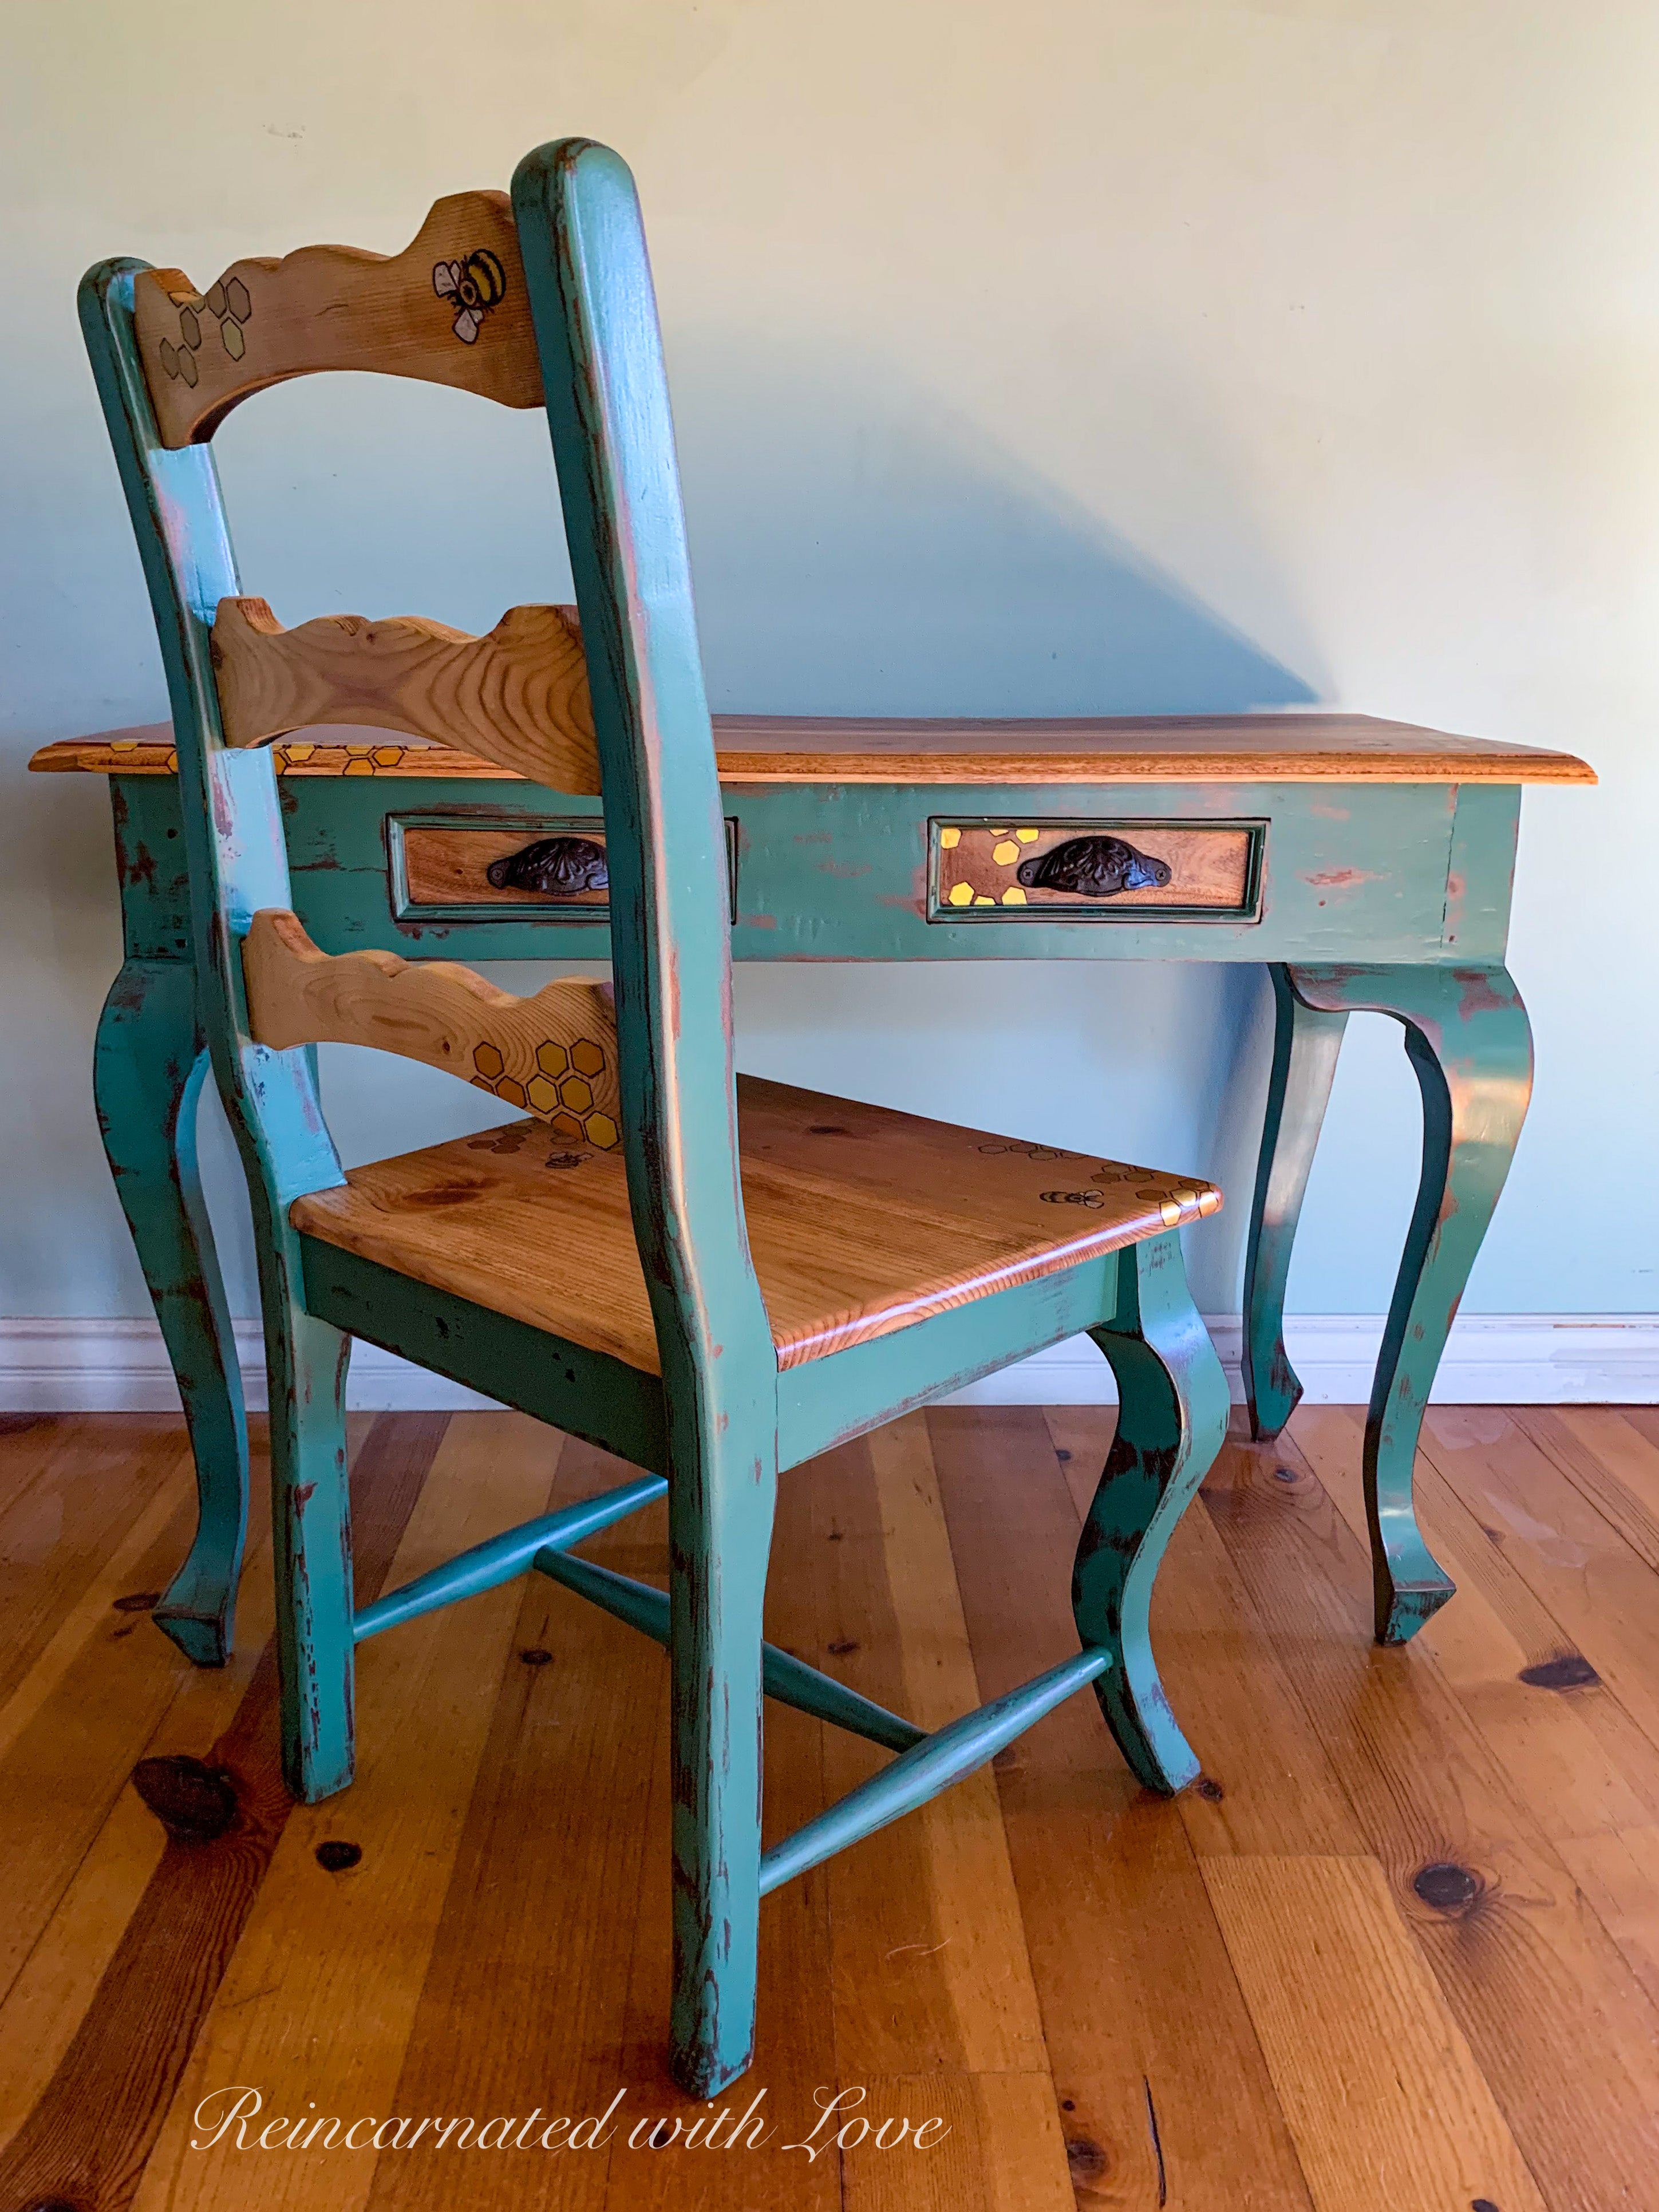 A vintage writing desk & chair set done in stained solid wood, with curved legs & distressed green trim.